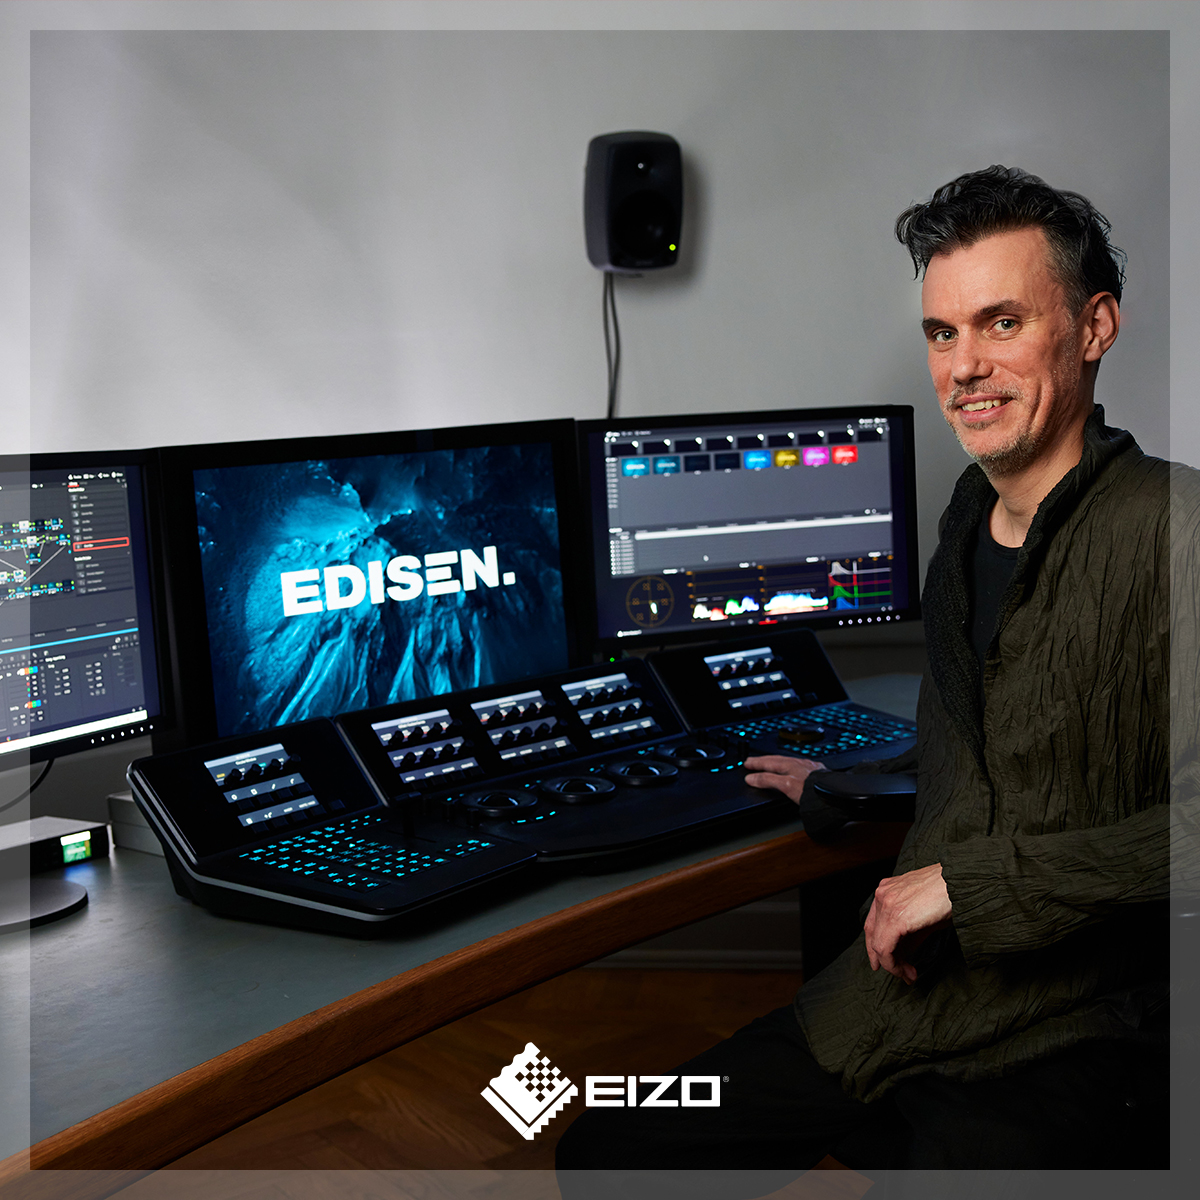 See why creative content producer @edisencompany chose the ColorEdge PROMINENCE CG3146 HDR reference monitor with built-in calibration for color grading. eizoglobal.com/solutions/case… #HDR #colormanagement #calibration #postproduction #colorgrading